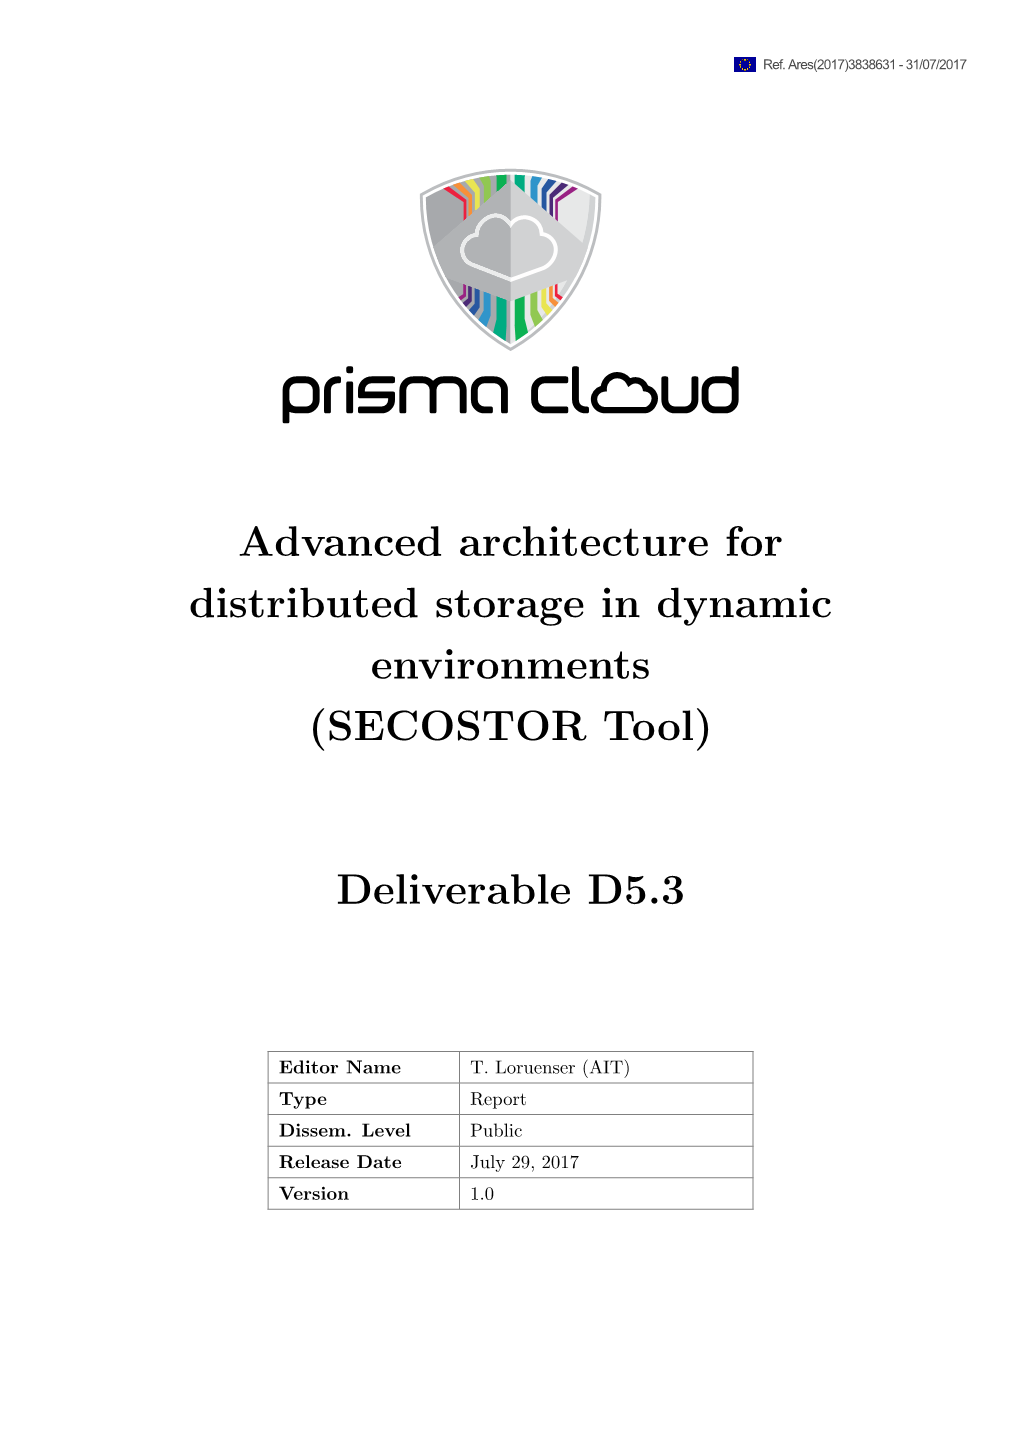 D5.3 Advanced Architecture for Distributed Storage in Dynamic Environments (SECOSTOR Tool)